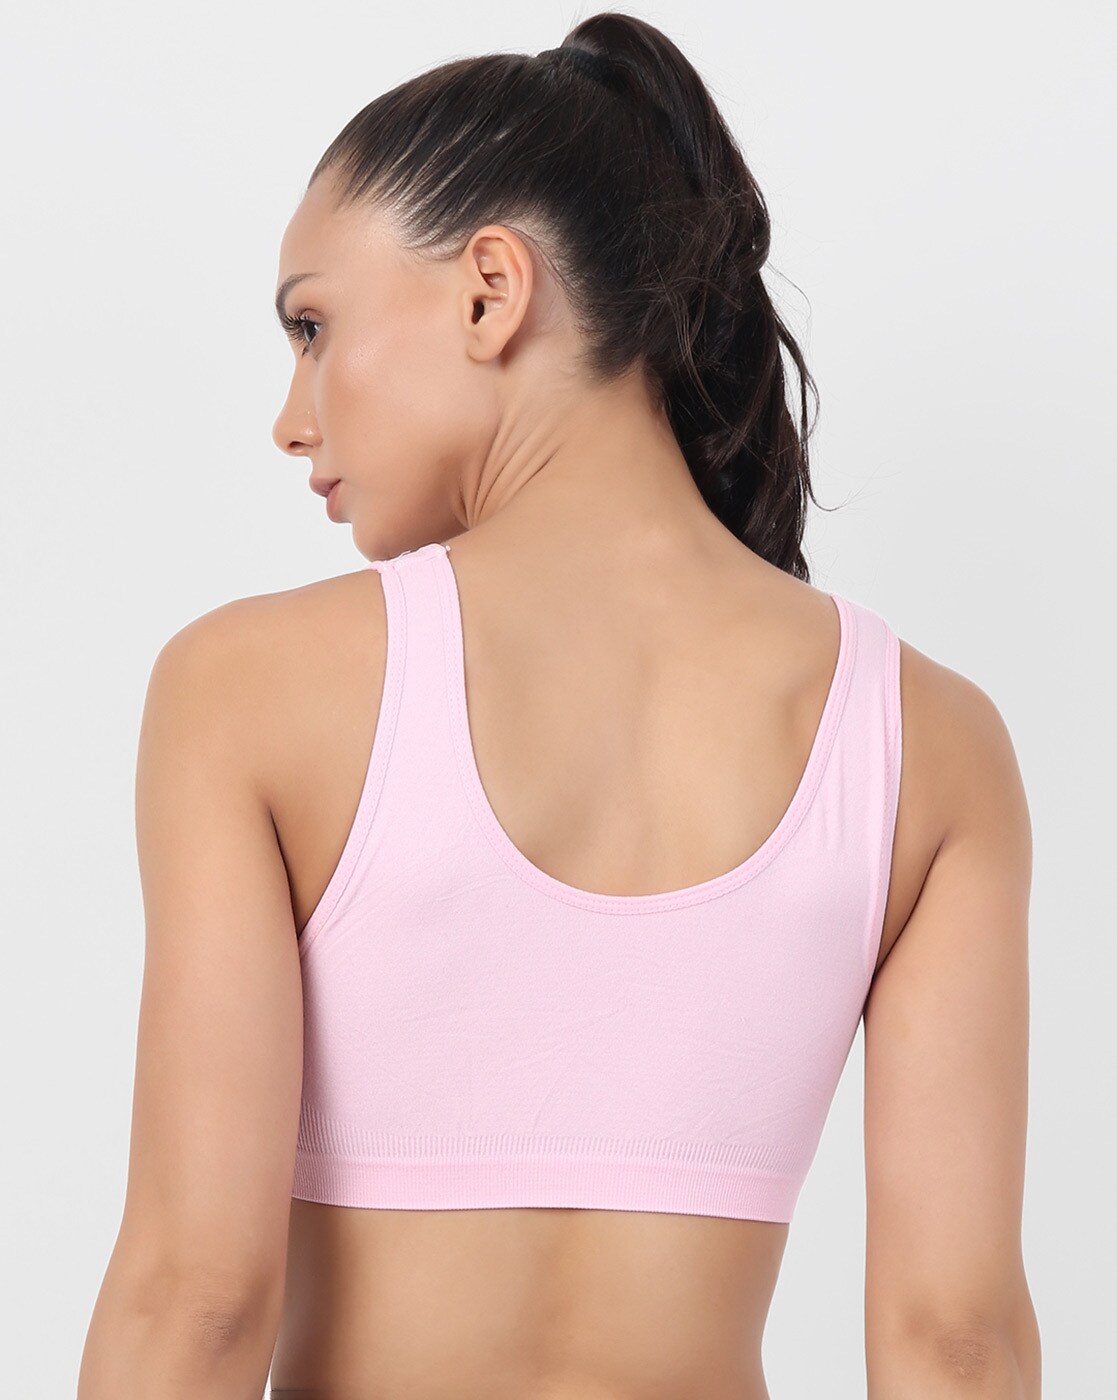 Buy Pink Bras for Women by Xoxo Design Online